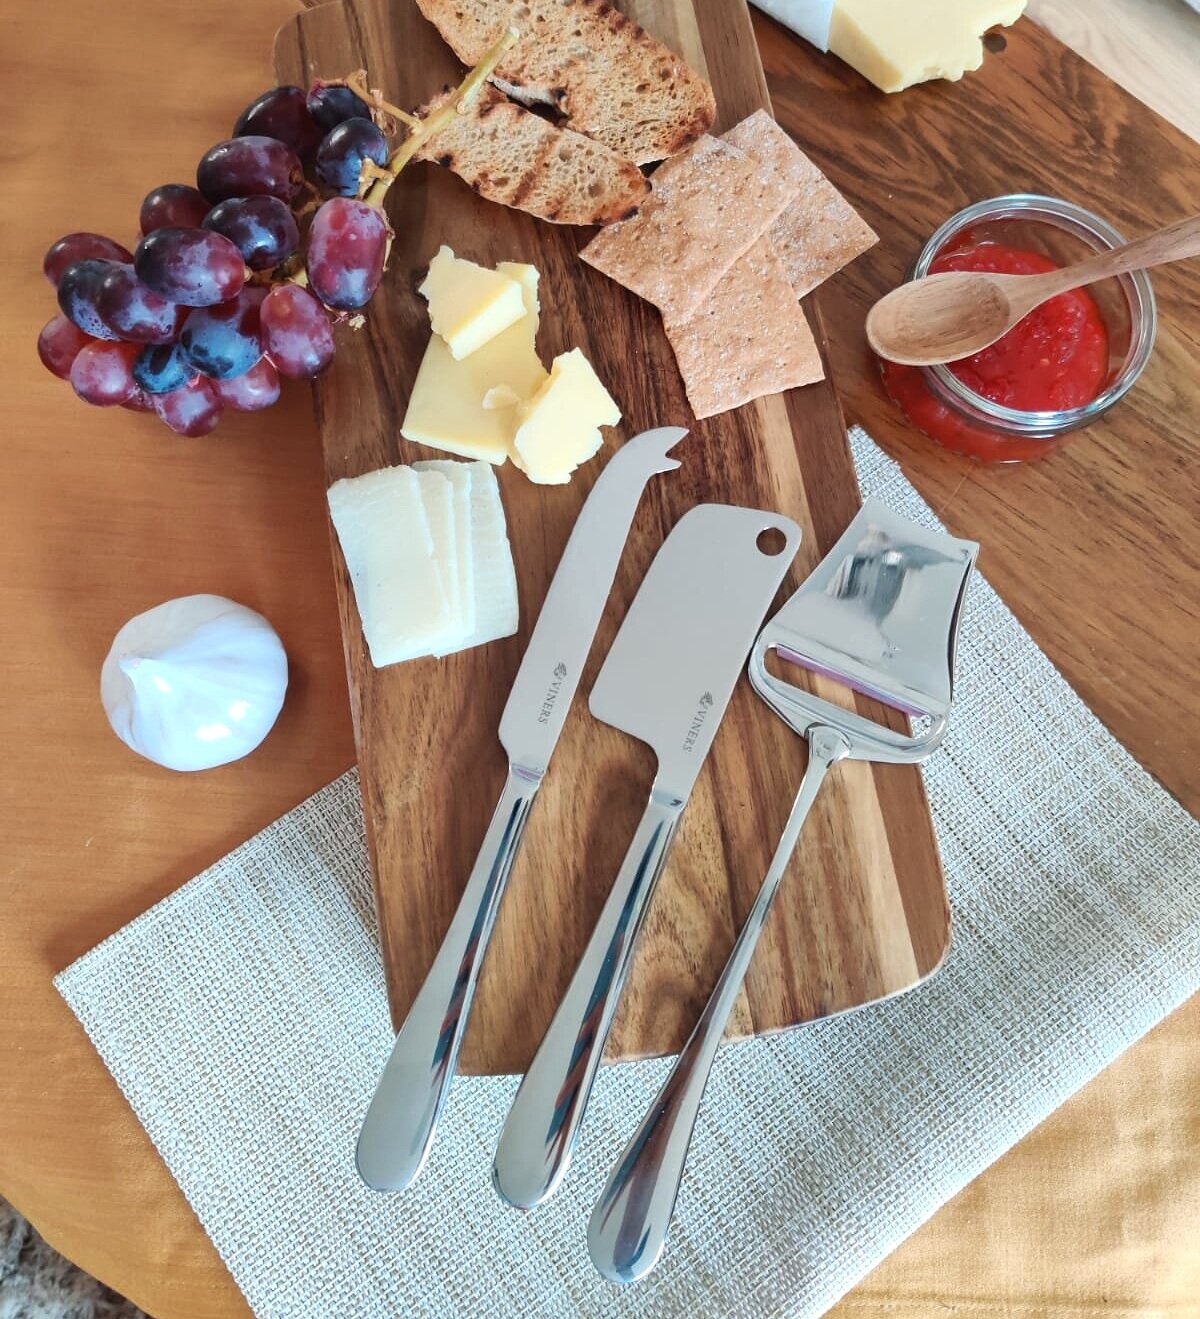 Viners cheese set